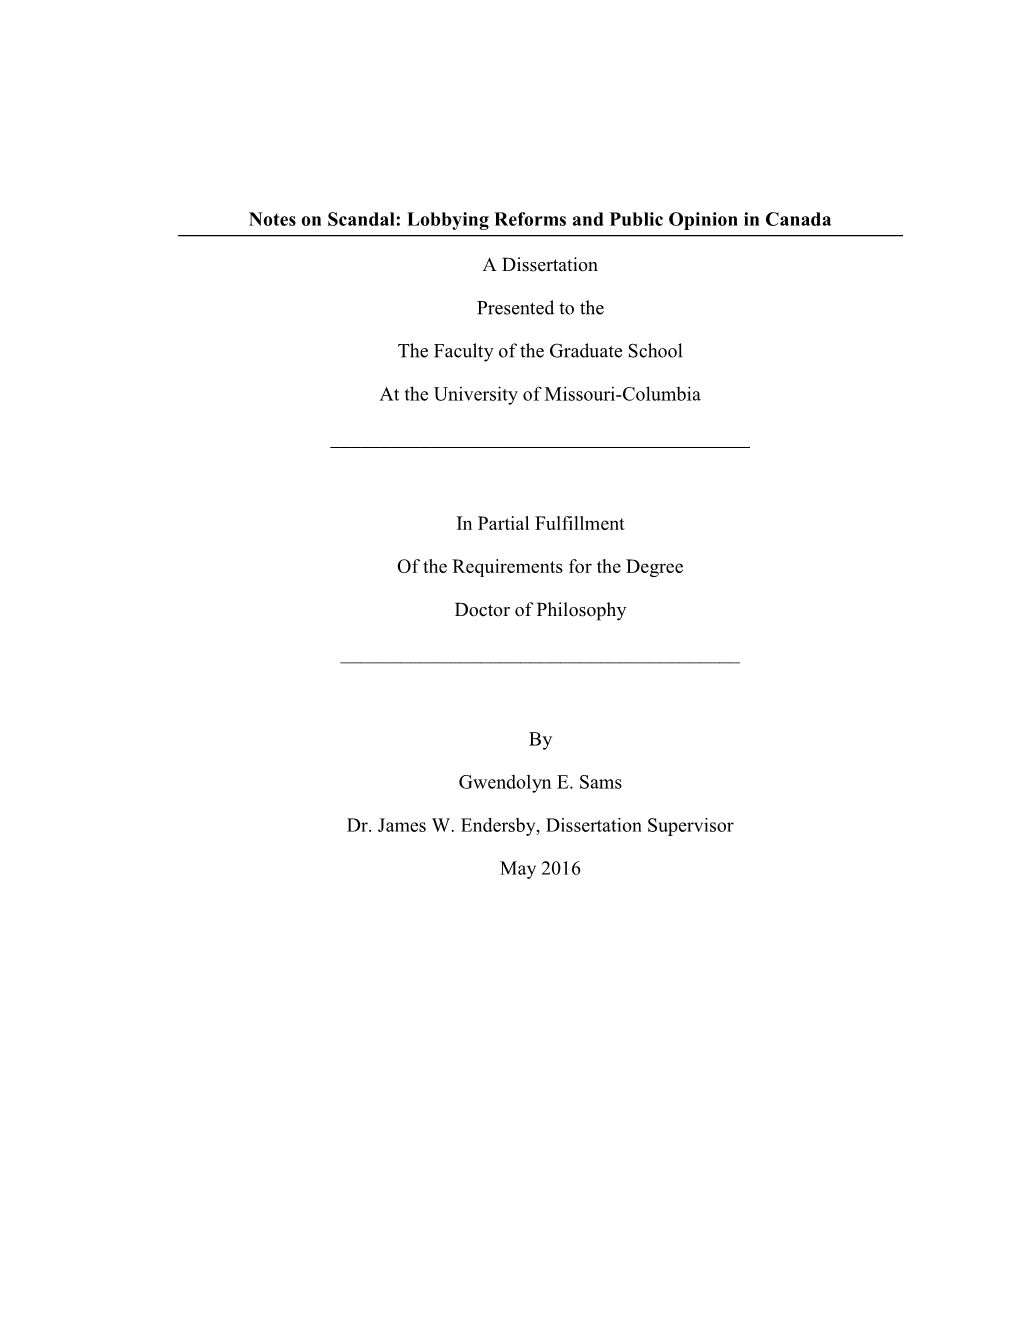 Notes on Scandal: Lobbying Reforms and Public Opinion in Canada A